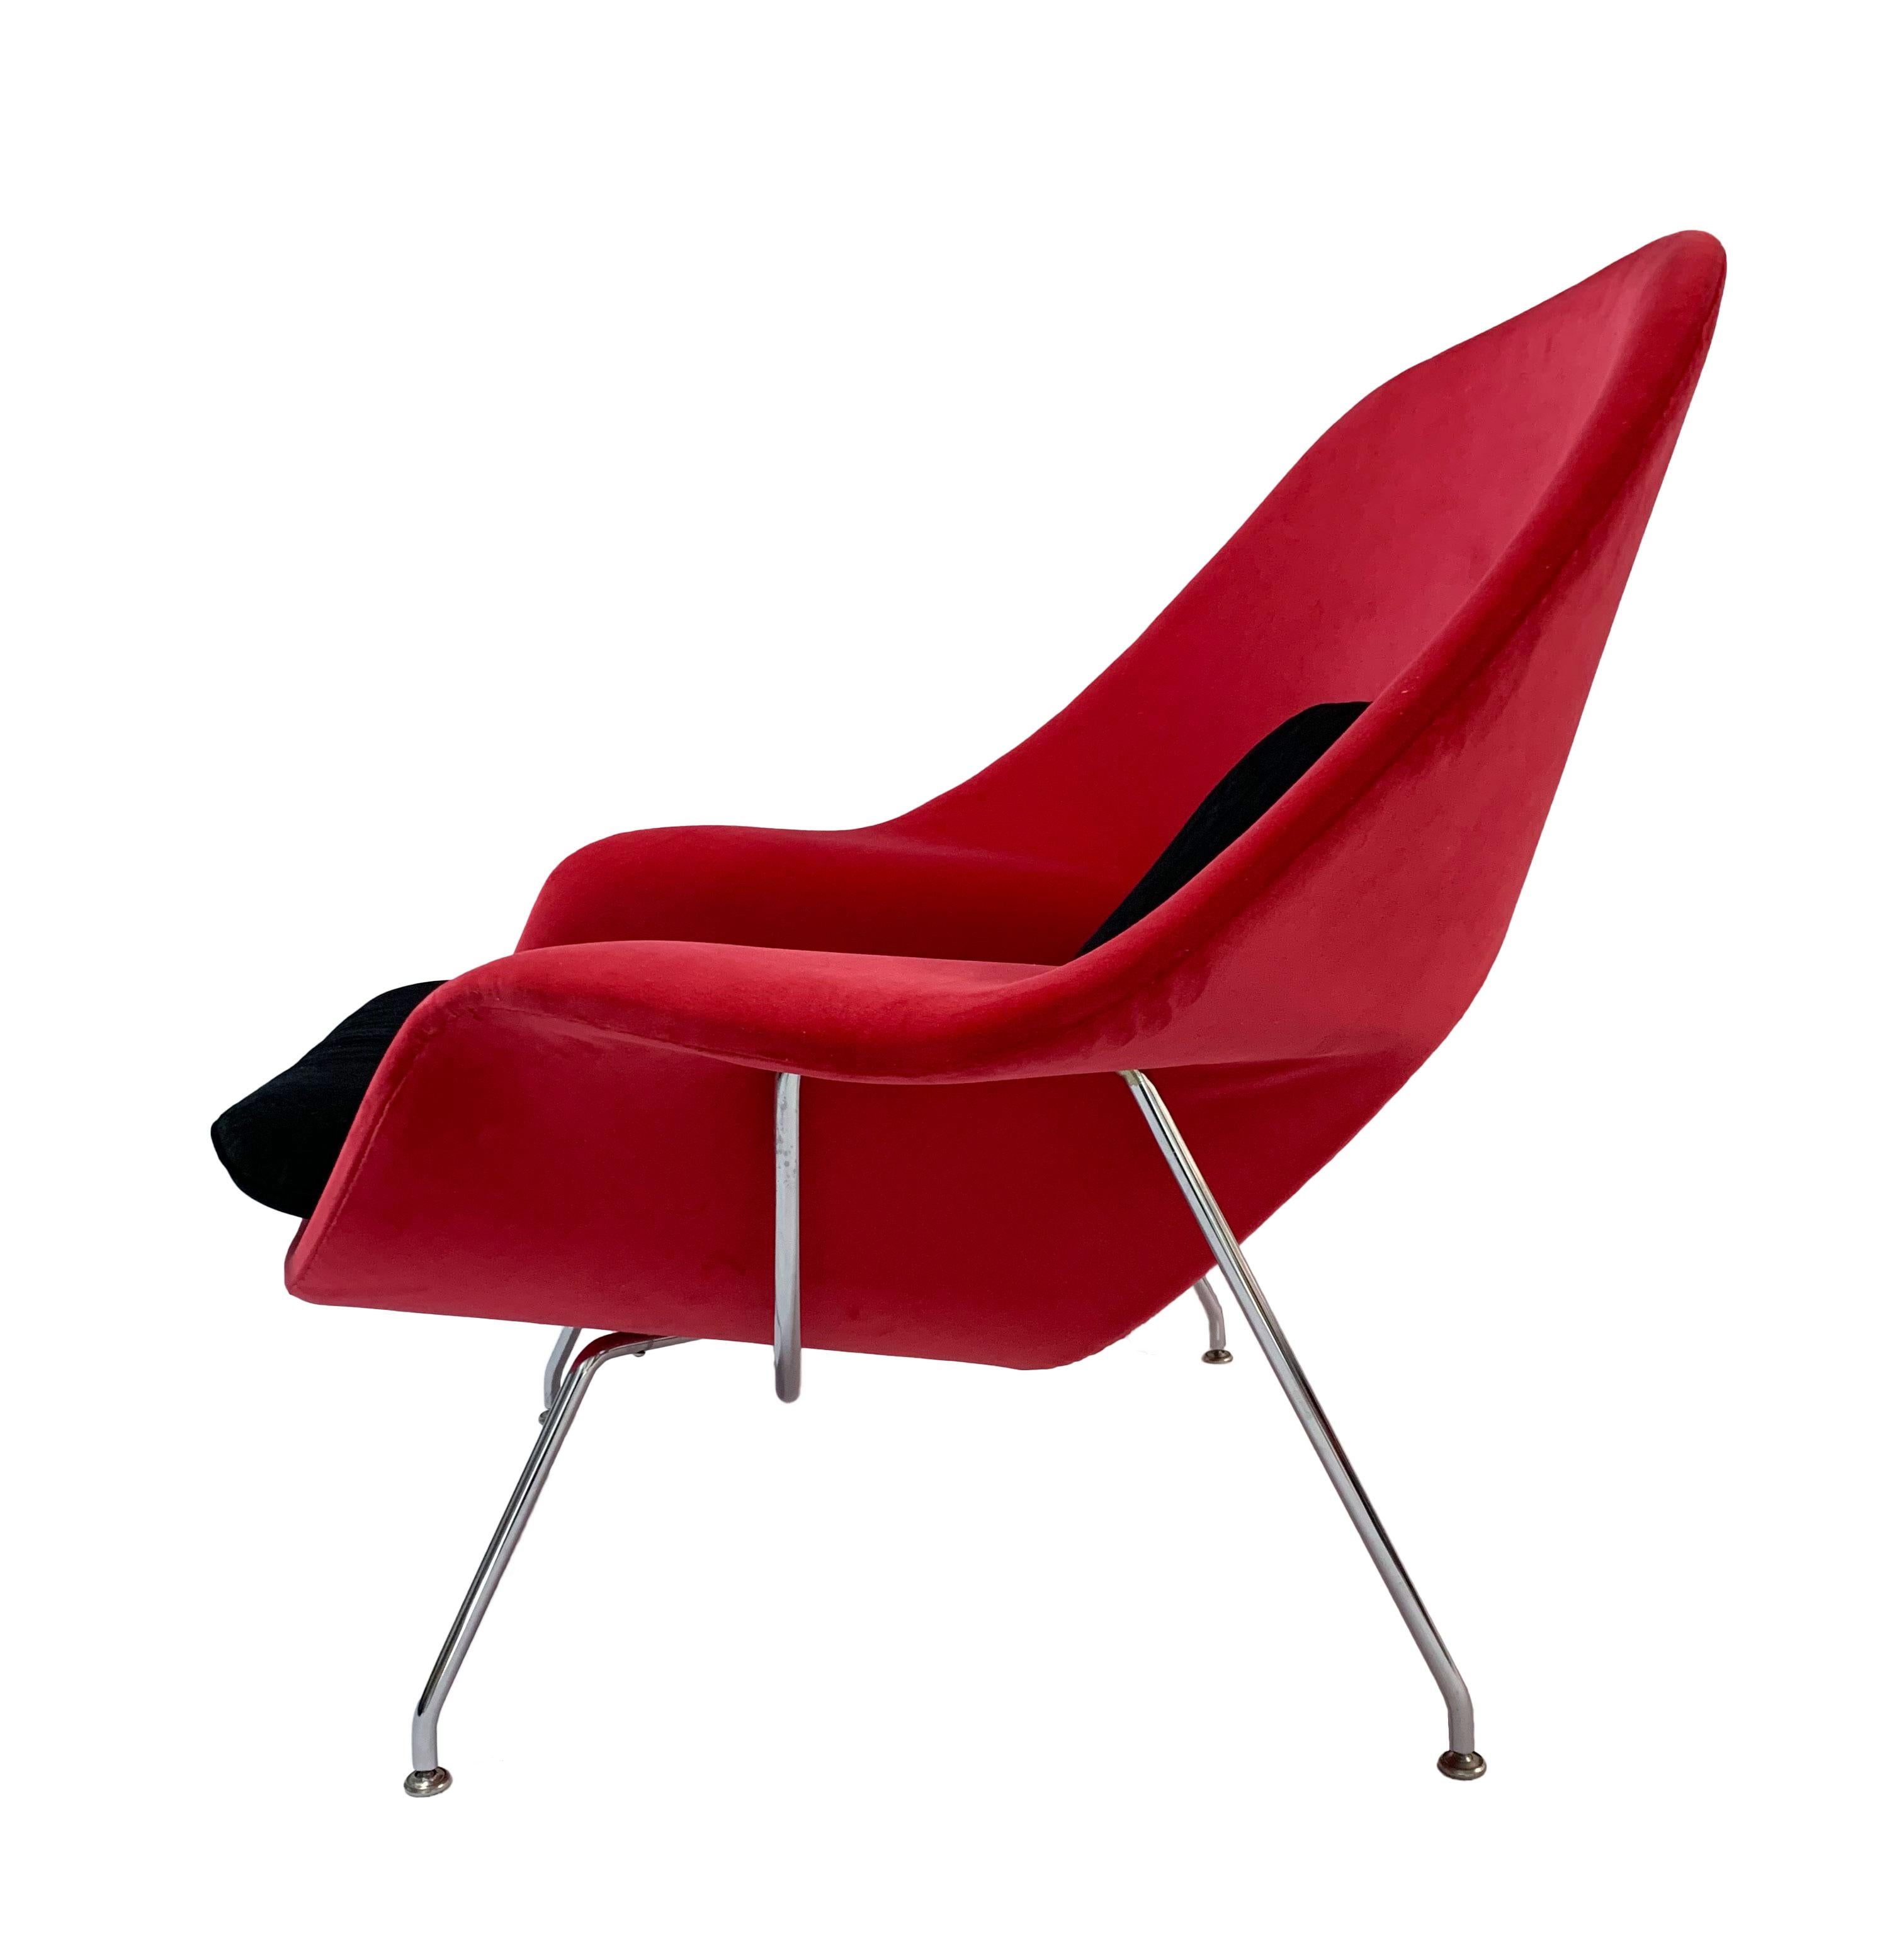 20th Century Iconic Mid-Century Modern Knoll Womb Chair and Ottoman For Sale